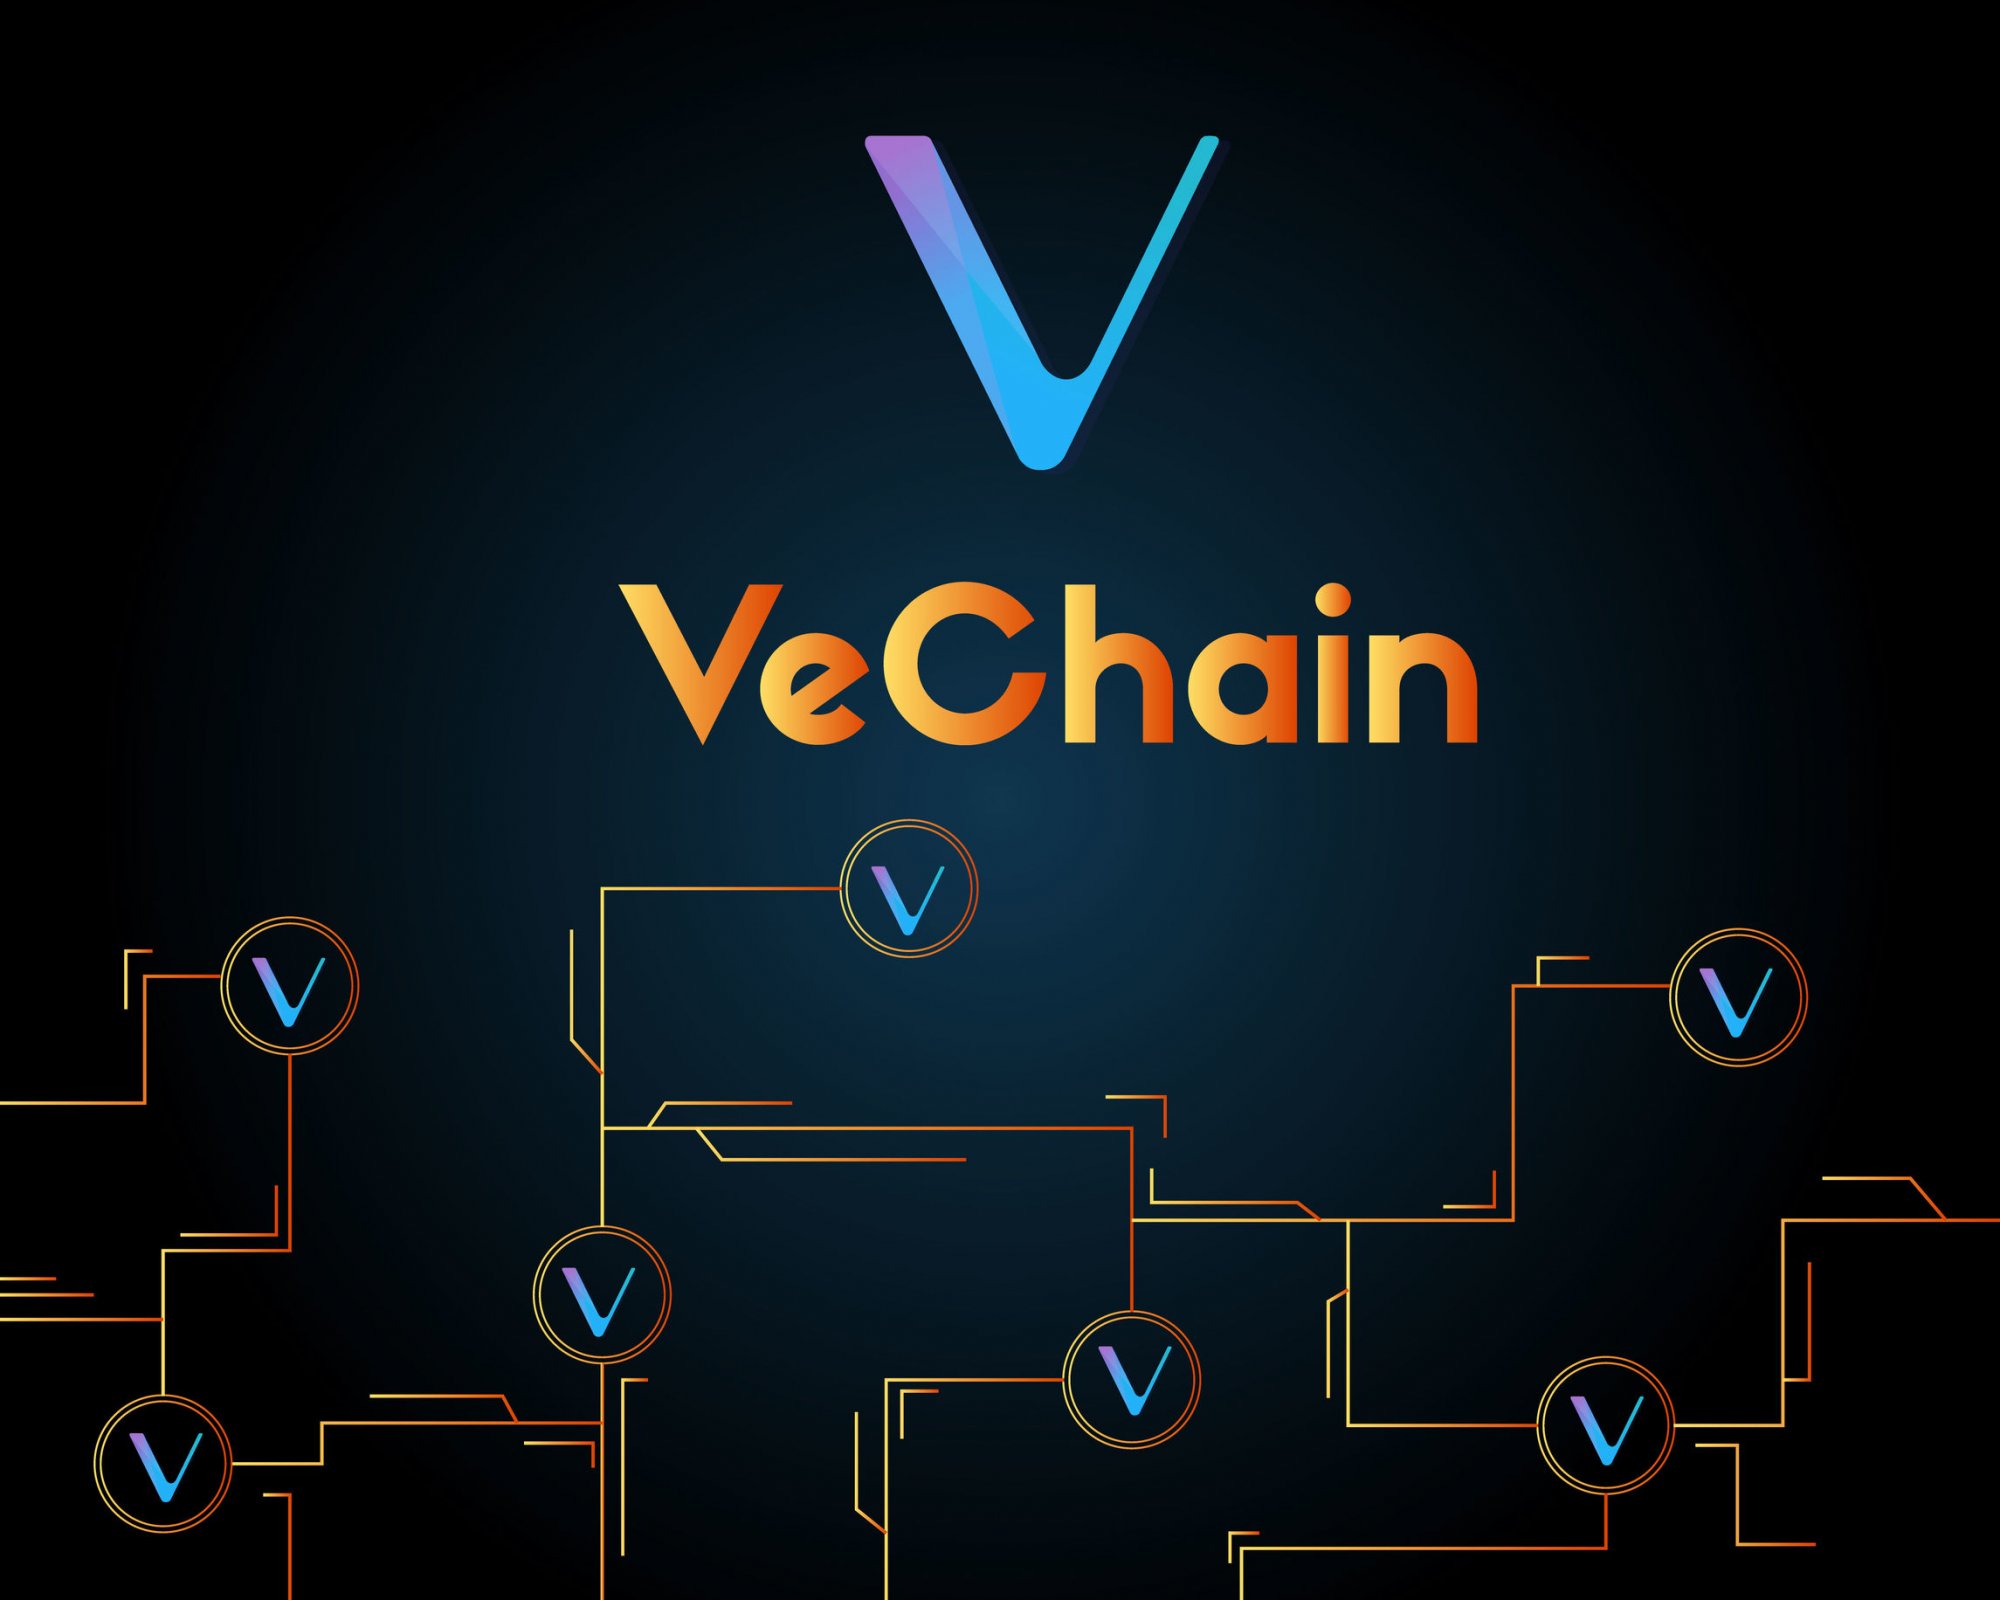 Vechain Price Analysis 2019 20 25 How Much Might Vet Cost - 